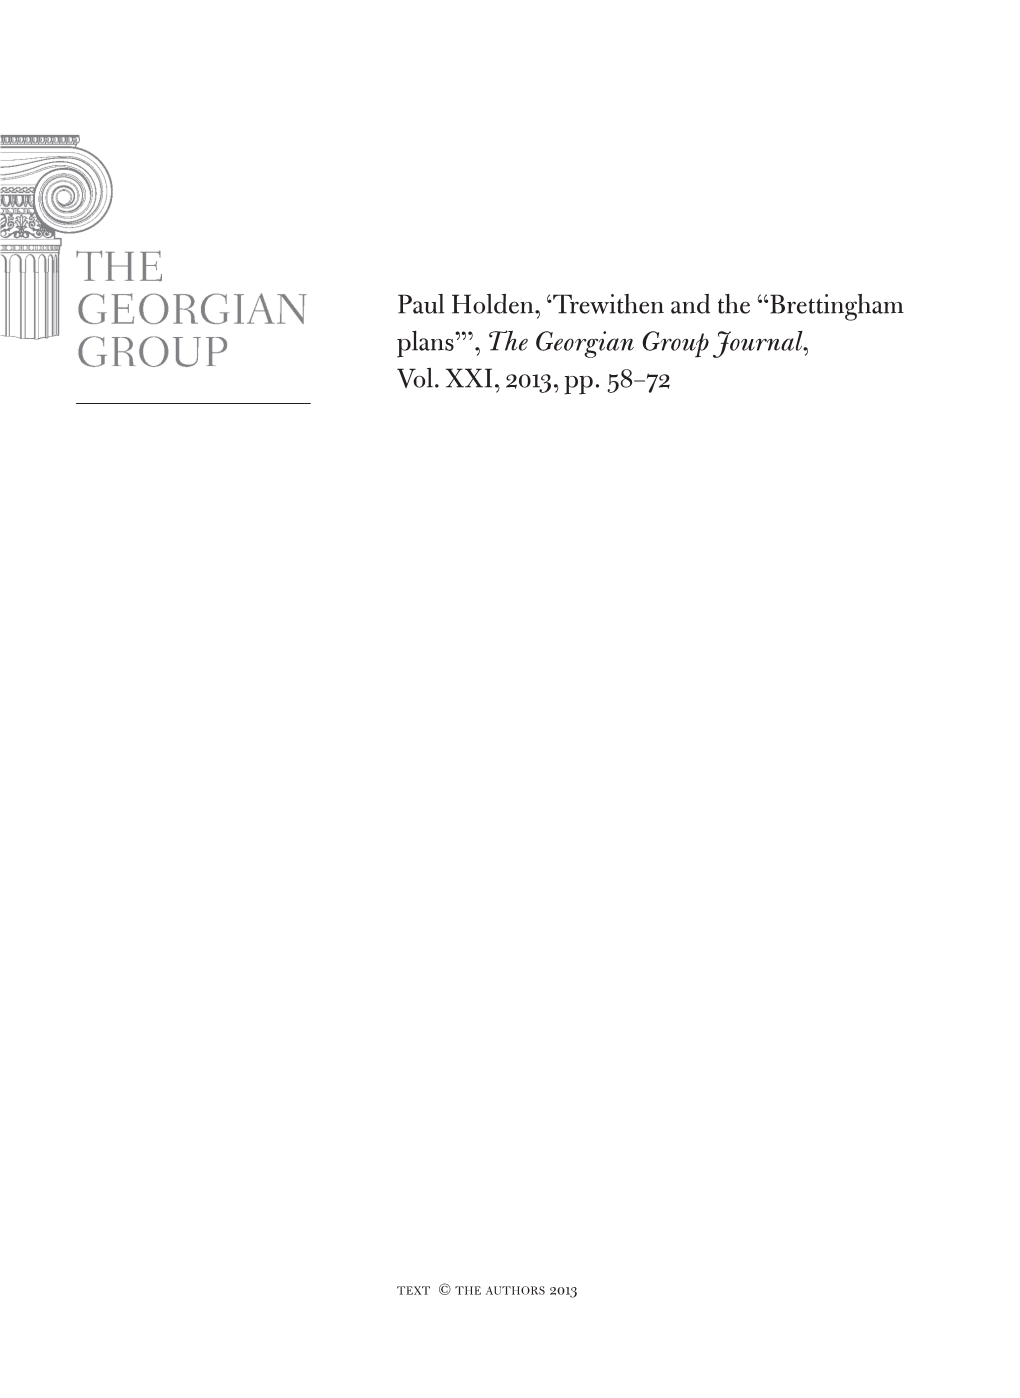 Trewithen and the “Brettingham Plans”’, the Georgian Group Journal, Vol